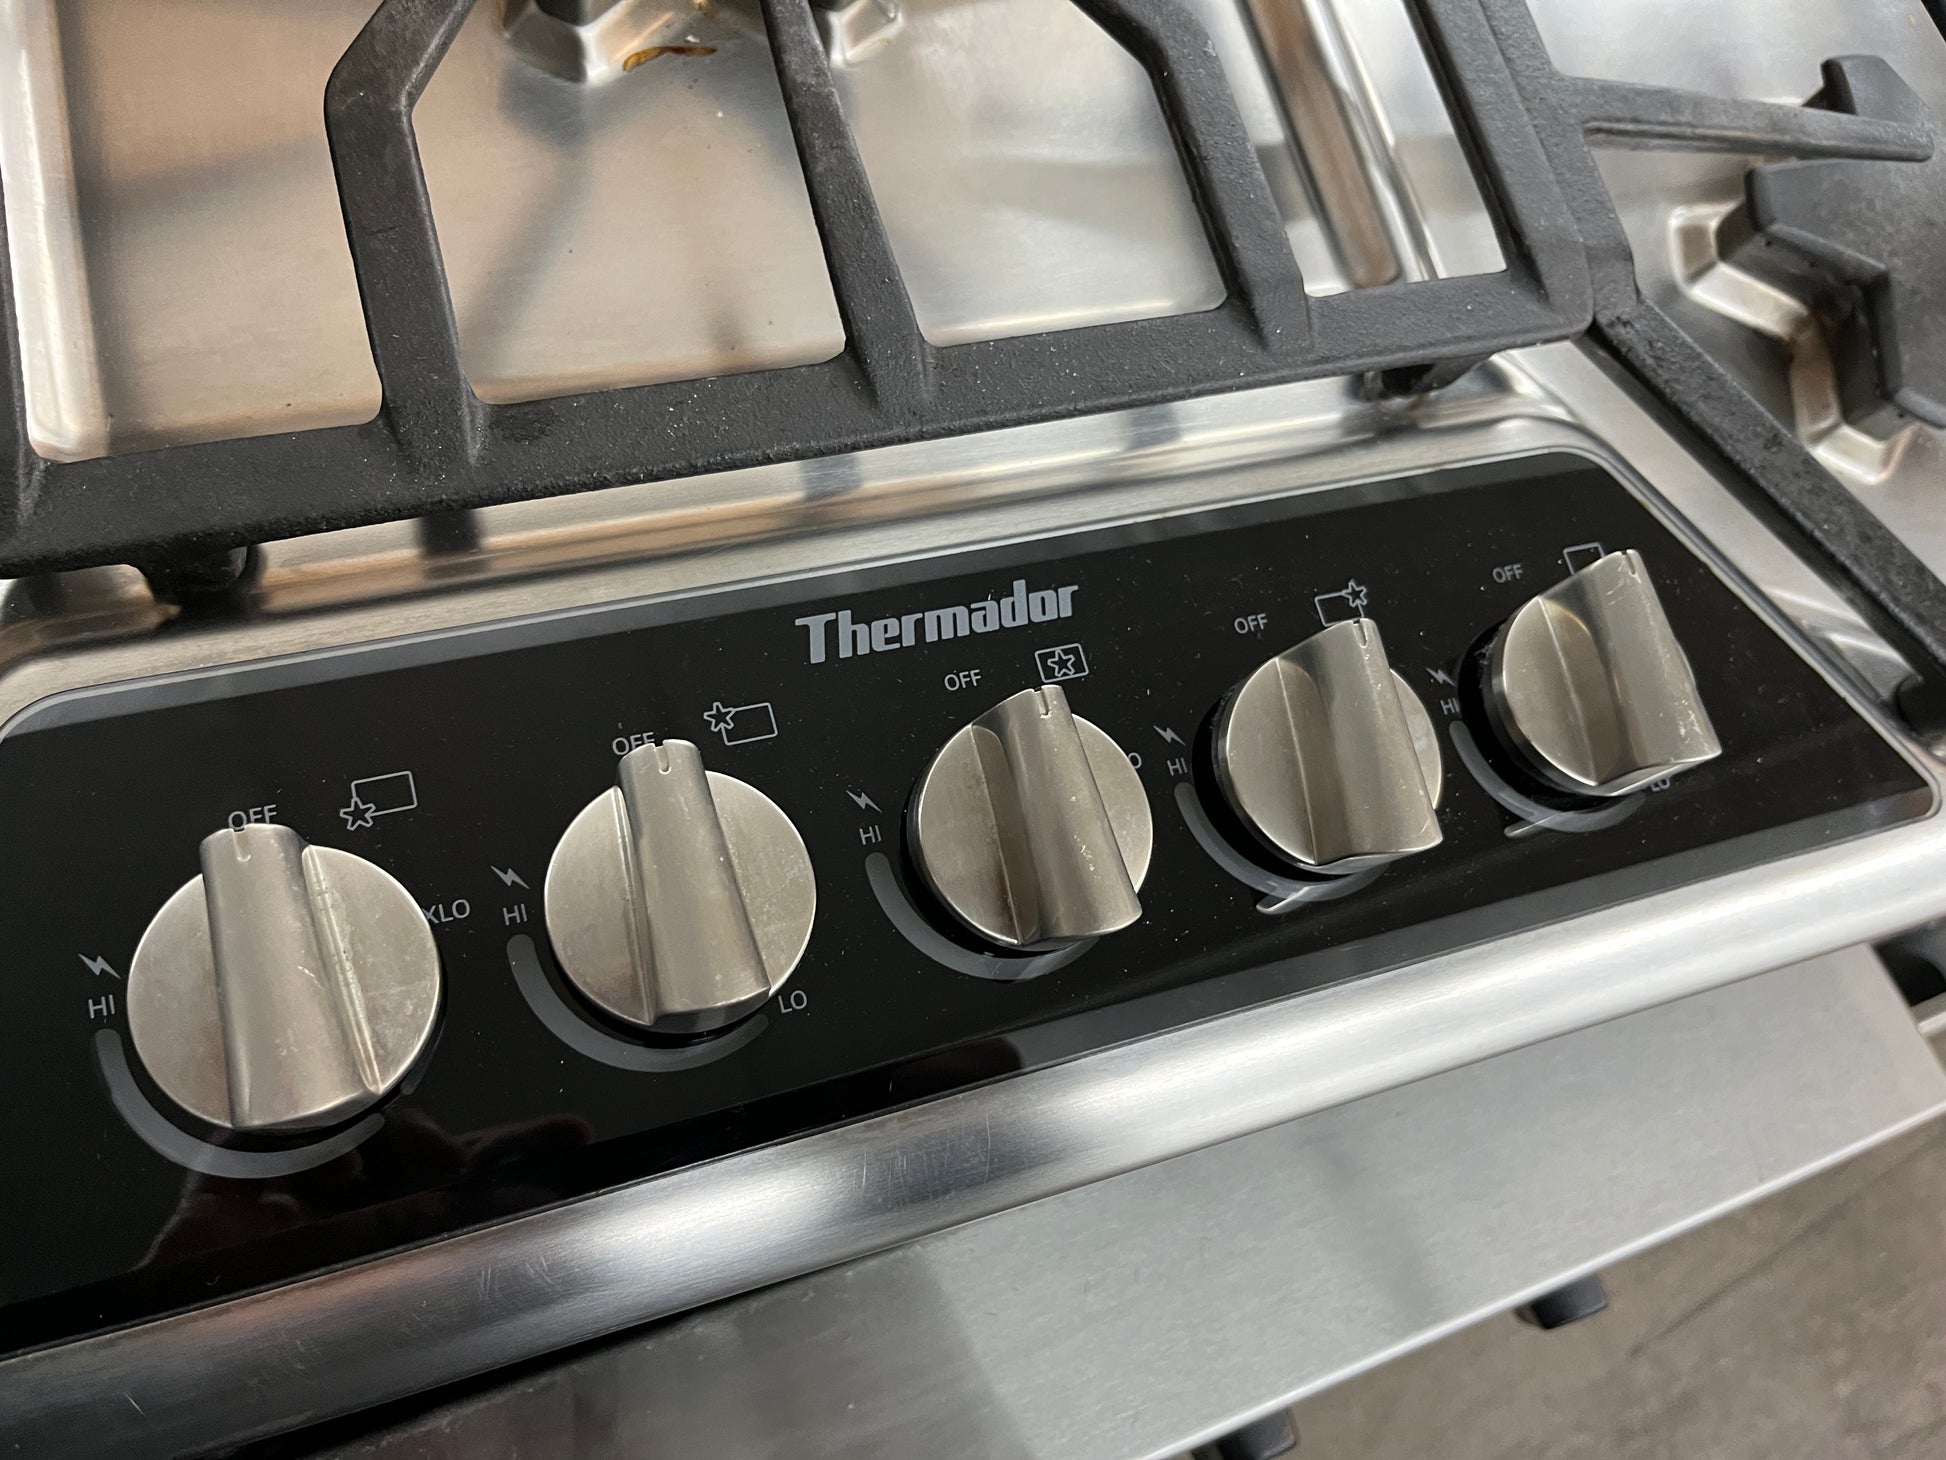 Downdraft Ventilation for Cooktops & Stovetops by Thermador